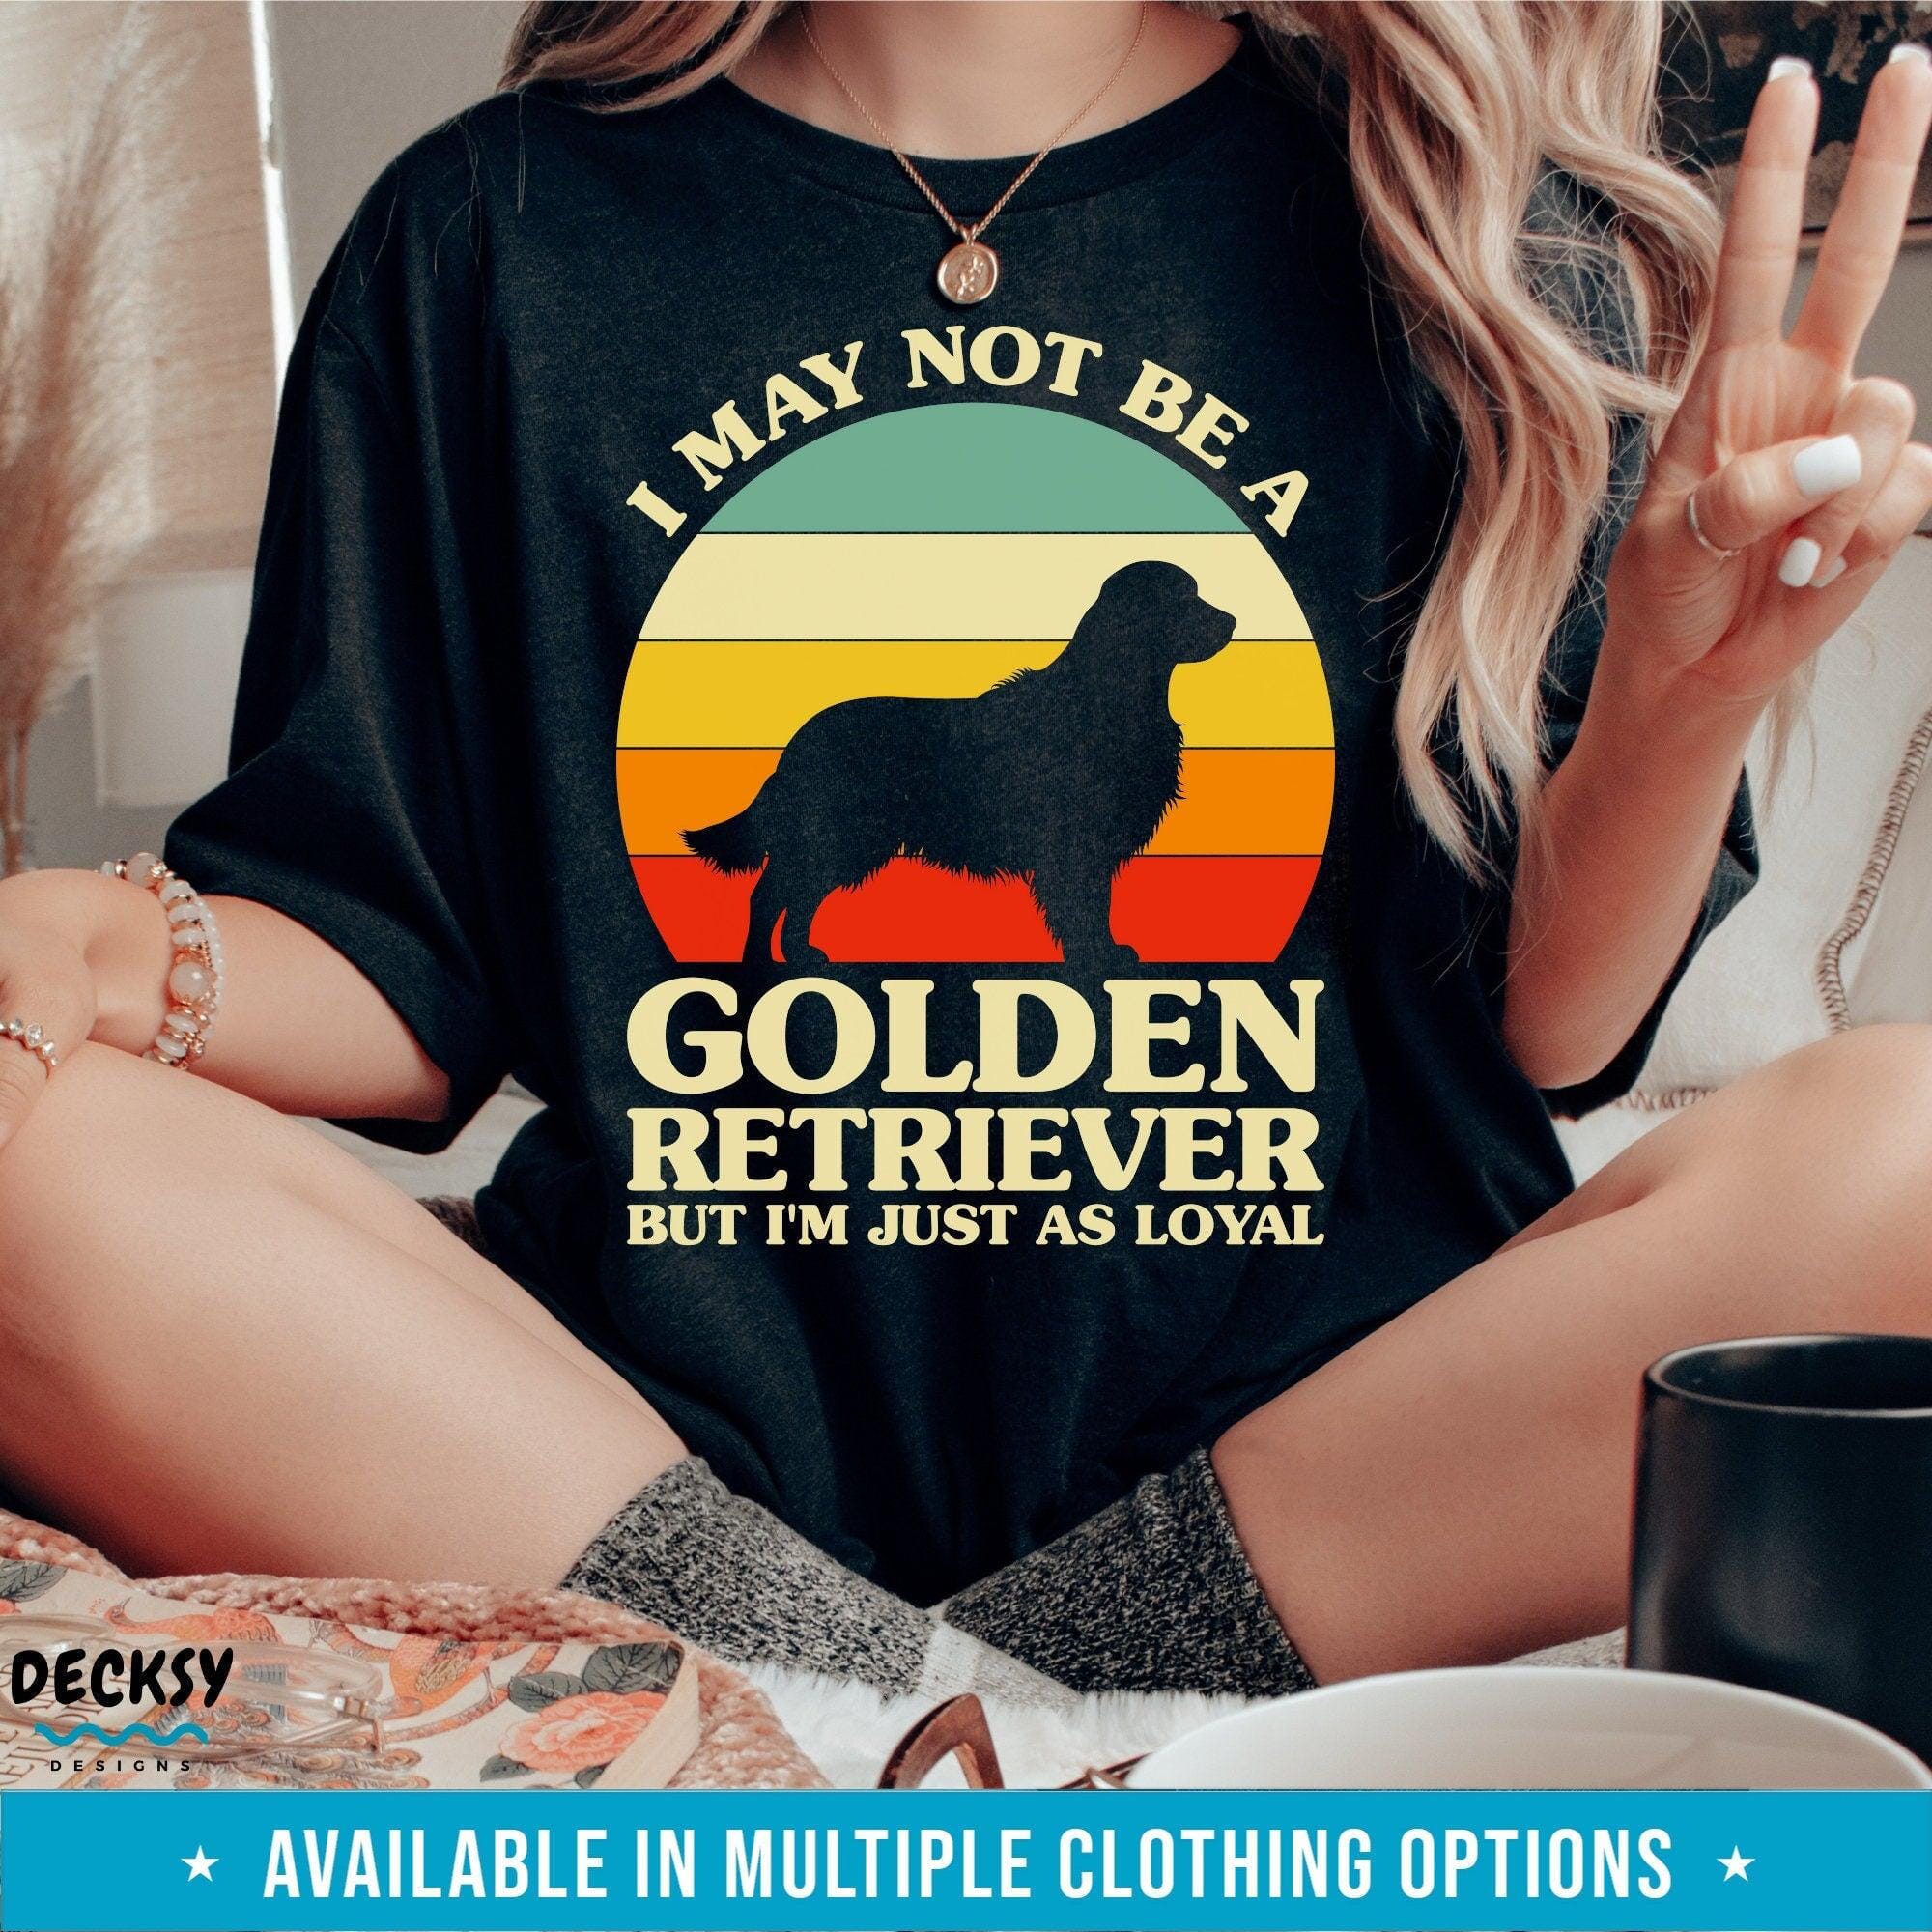 Golden Retriever Sweatshirt, Dog Lover Gift-Clothing:Gender-Neutral Adult Clothing:Tops & Tees:T-shirts:Graphic Tees-DecksyDesigns